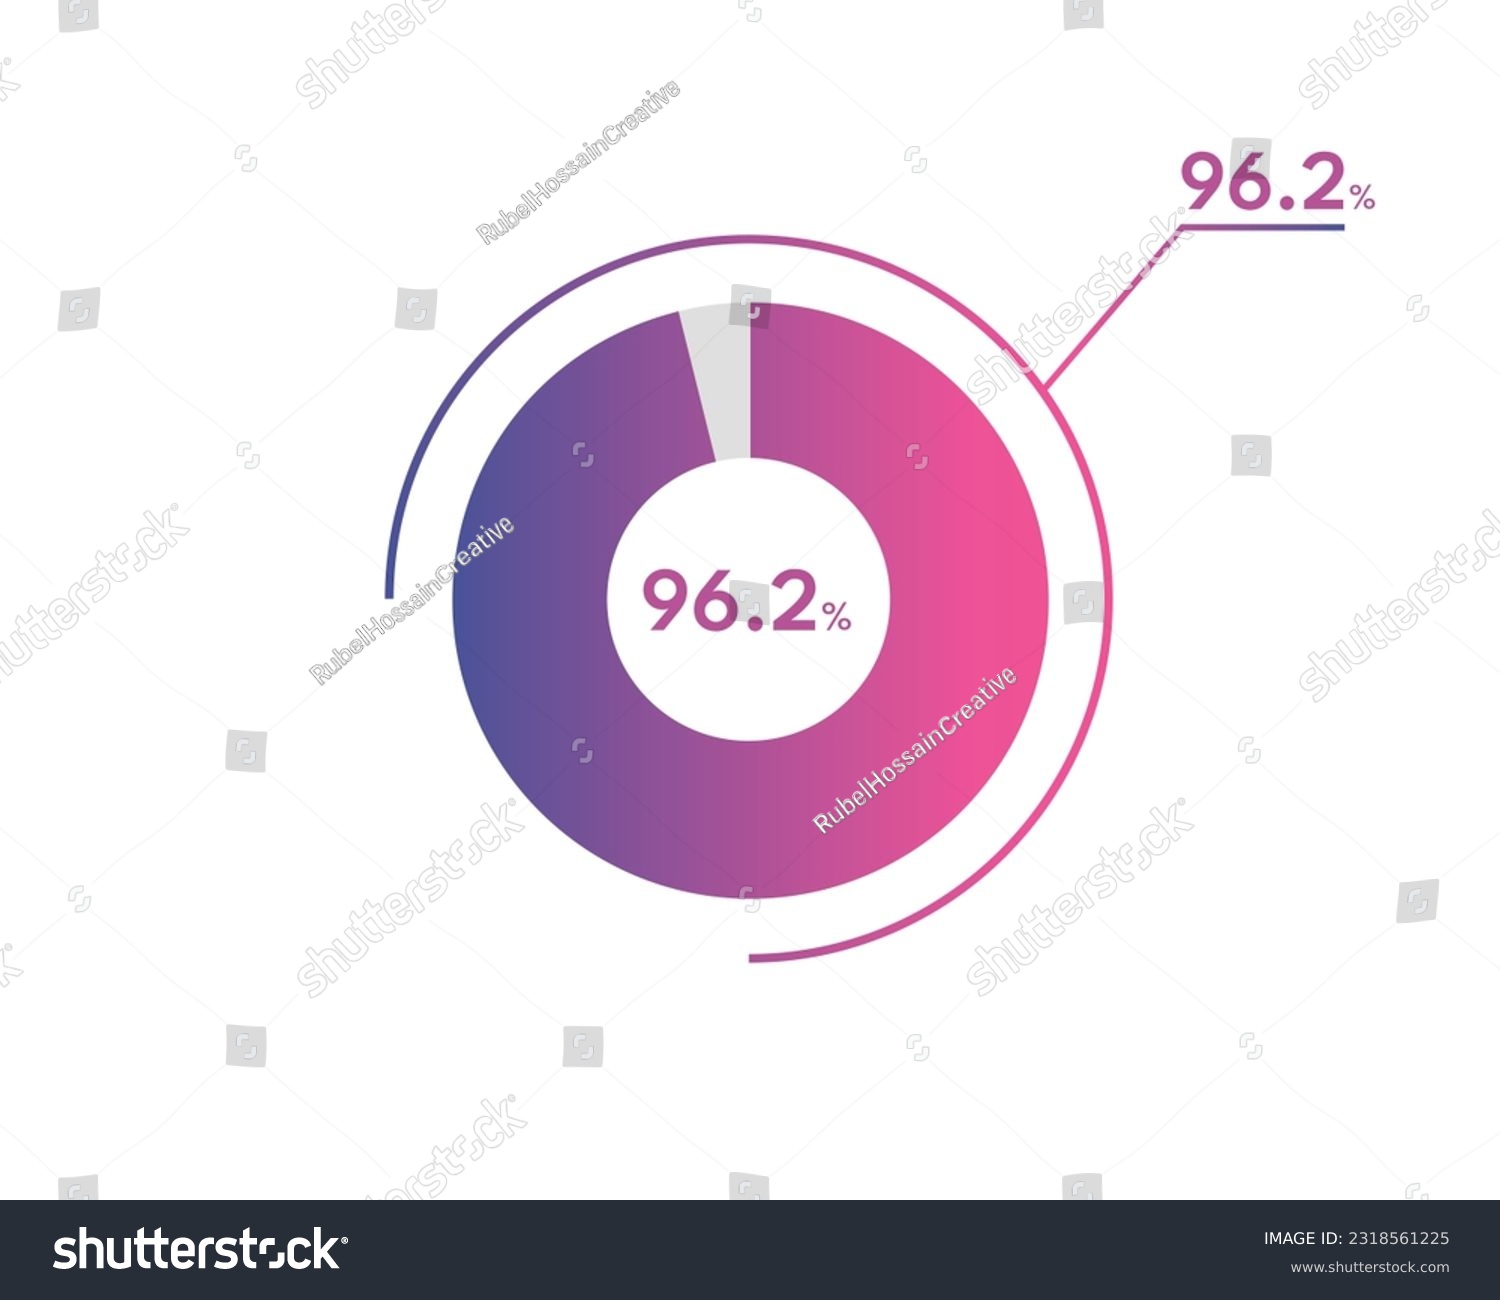 SVG of 96.2 Percentage circle diagrams Infographics vector, circle diagram business illustration, Designing the 96.2% Segment in the Pie Chart. svg